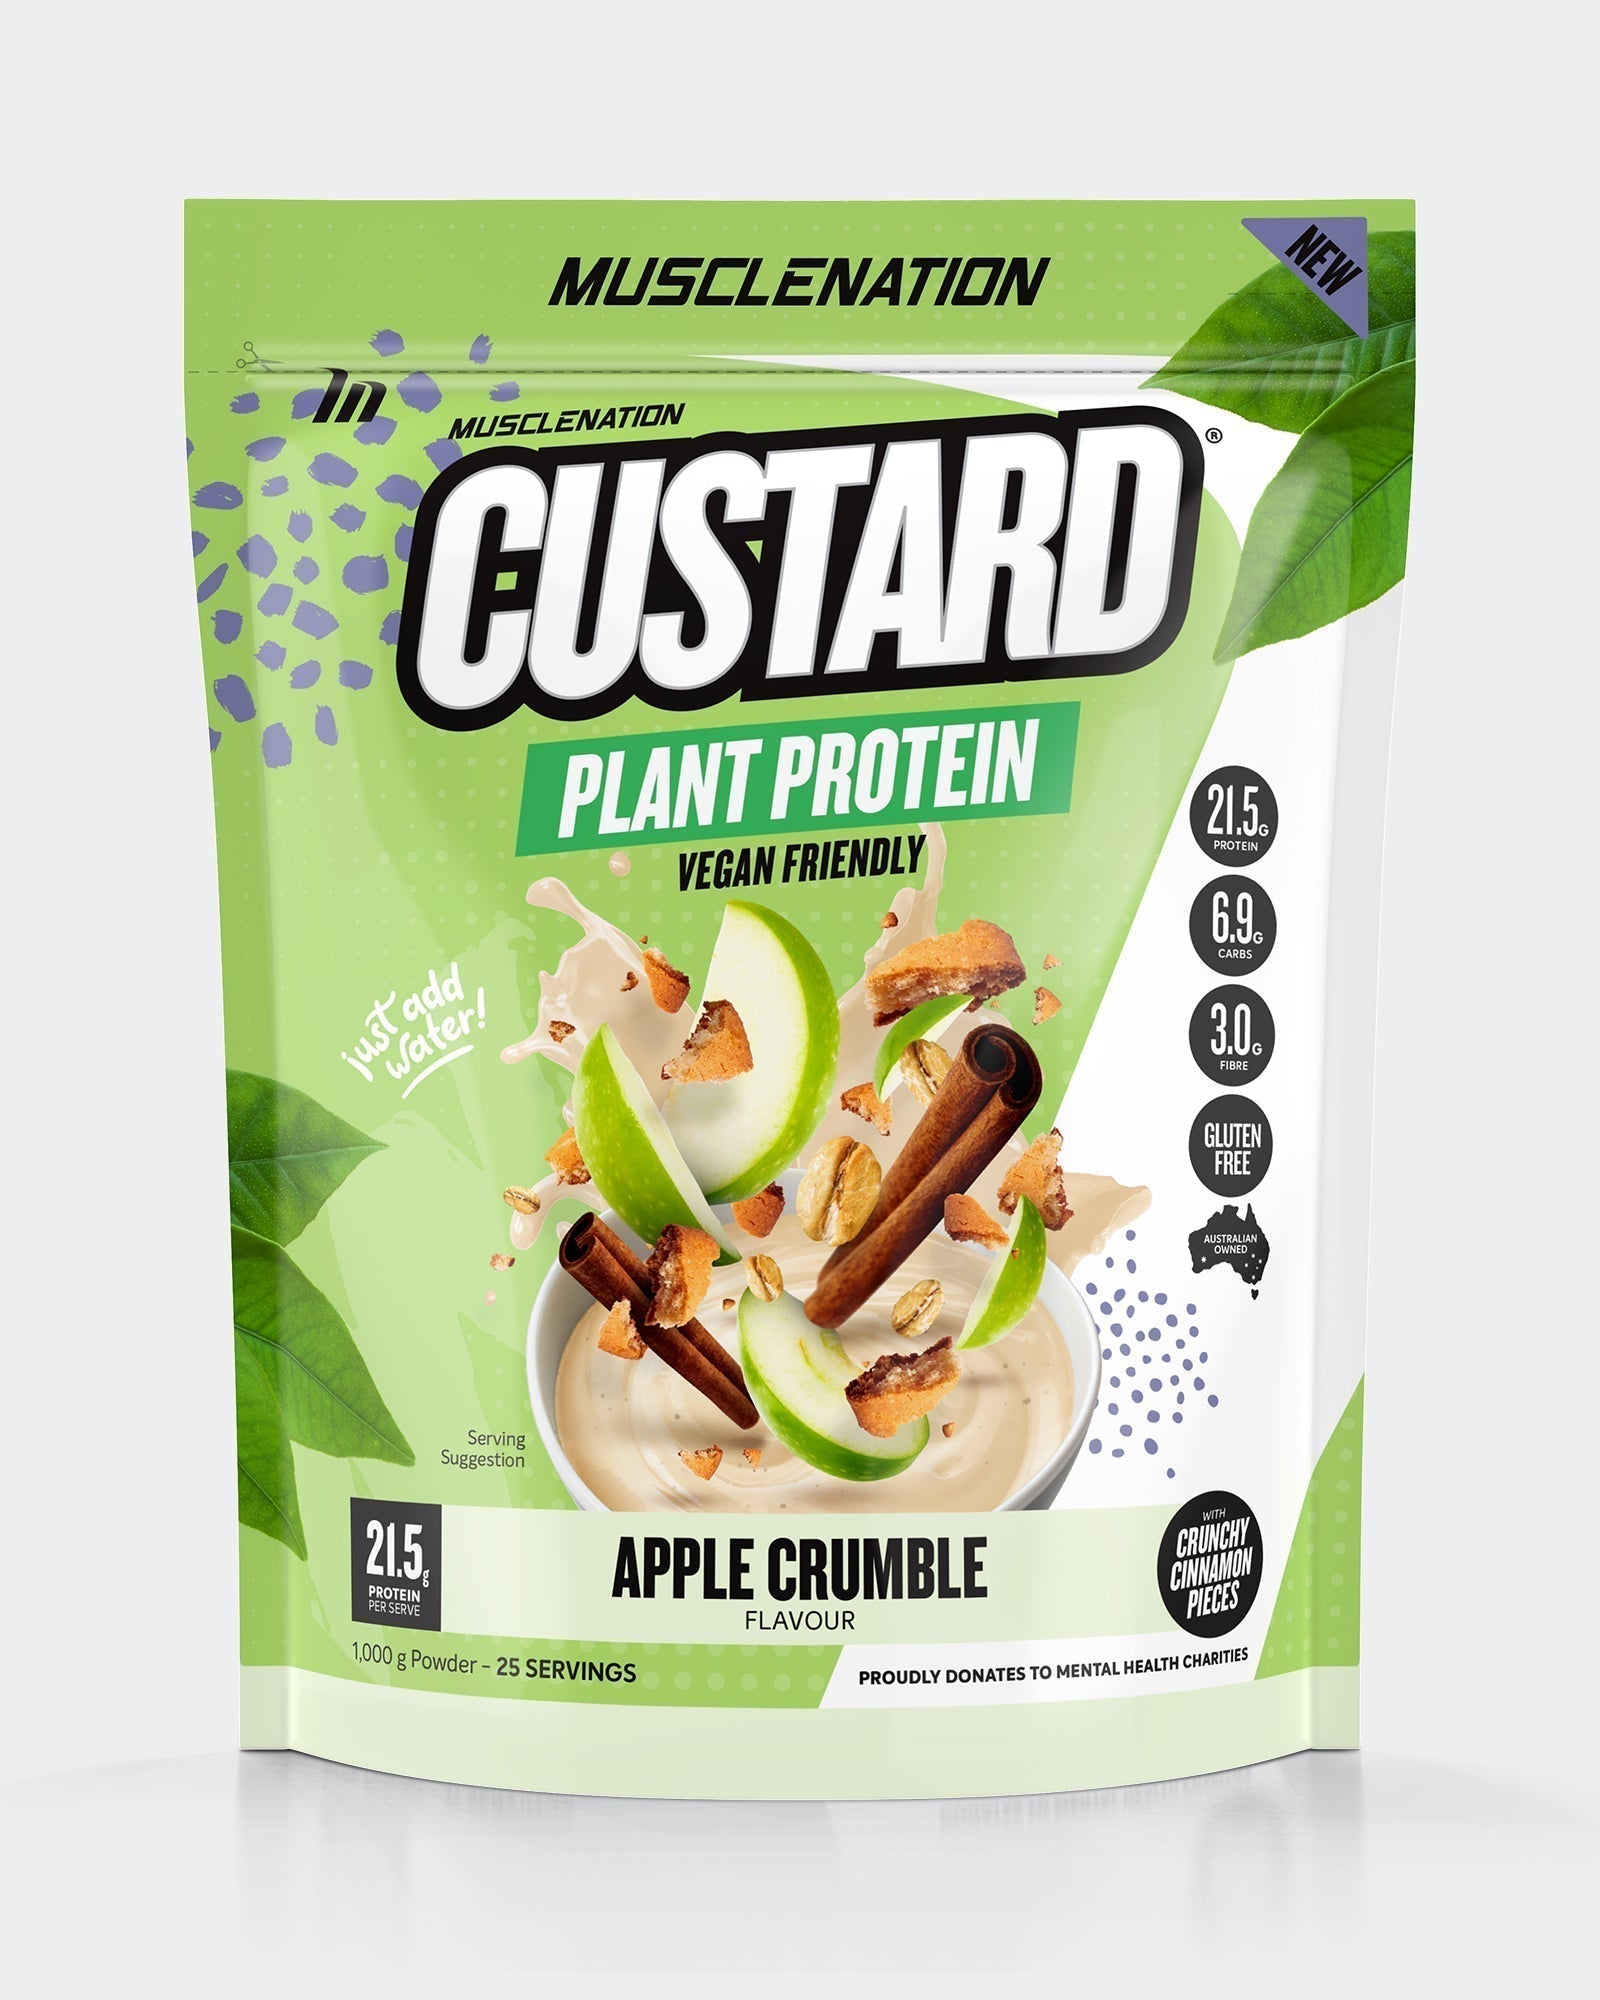 Muscle Nation CUSTARD PLANT PROTEIN - APPLE CRUMBLE